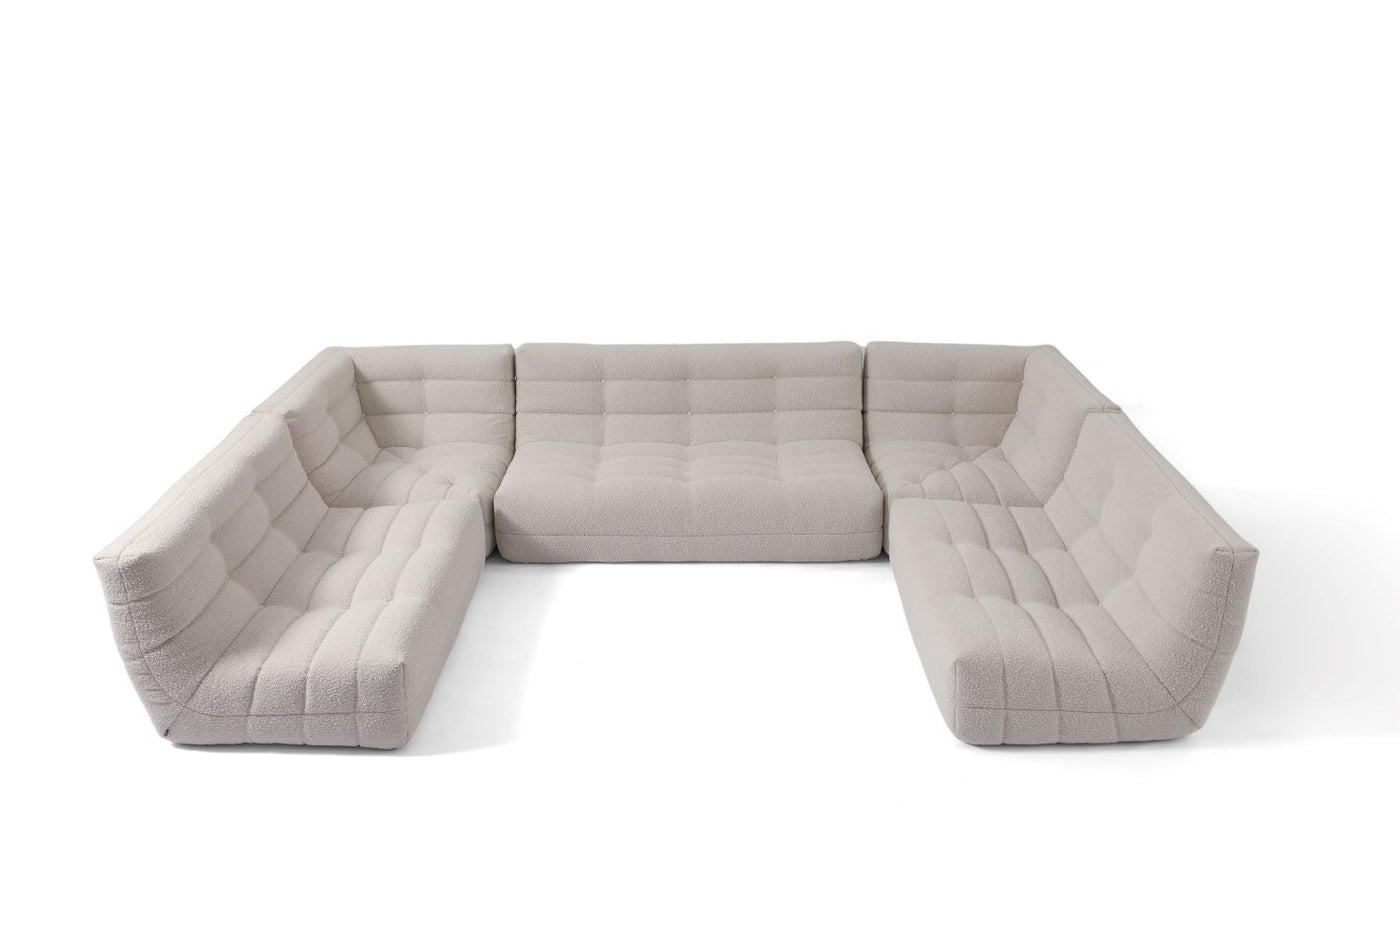 Russo2 Deluxe 5 piece sectional sofa